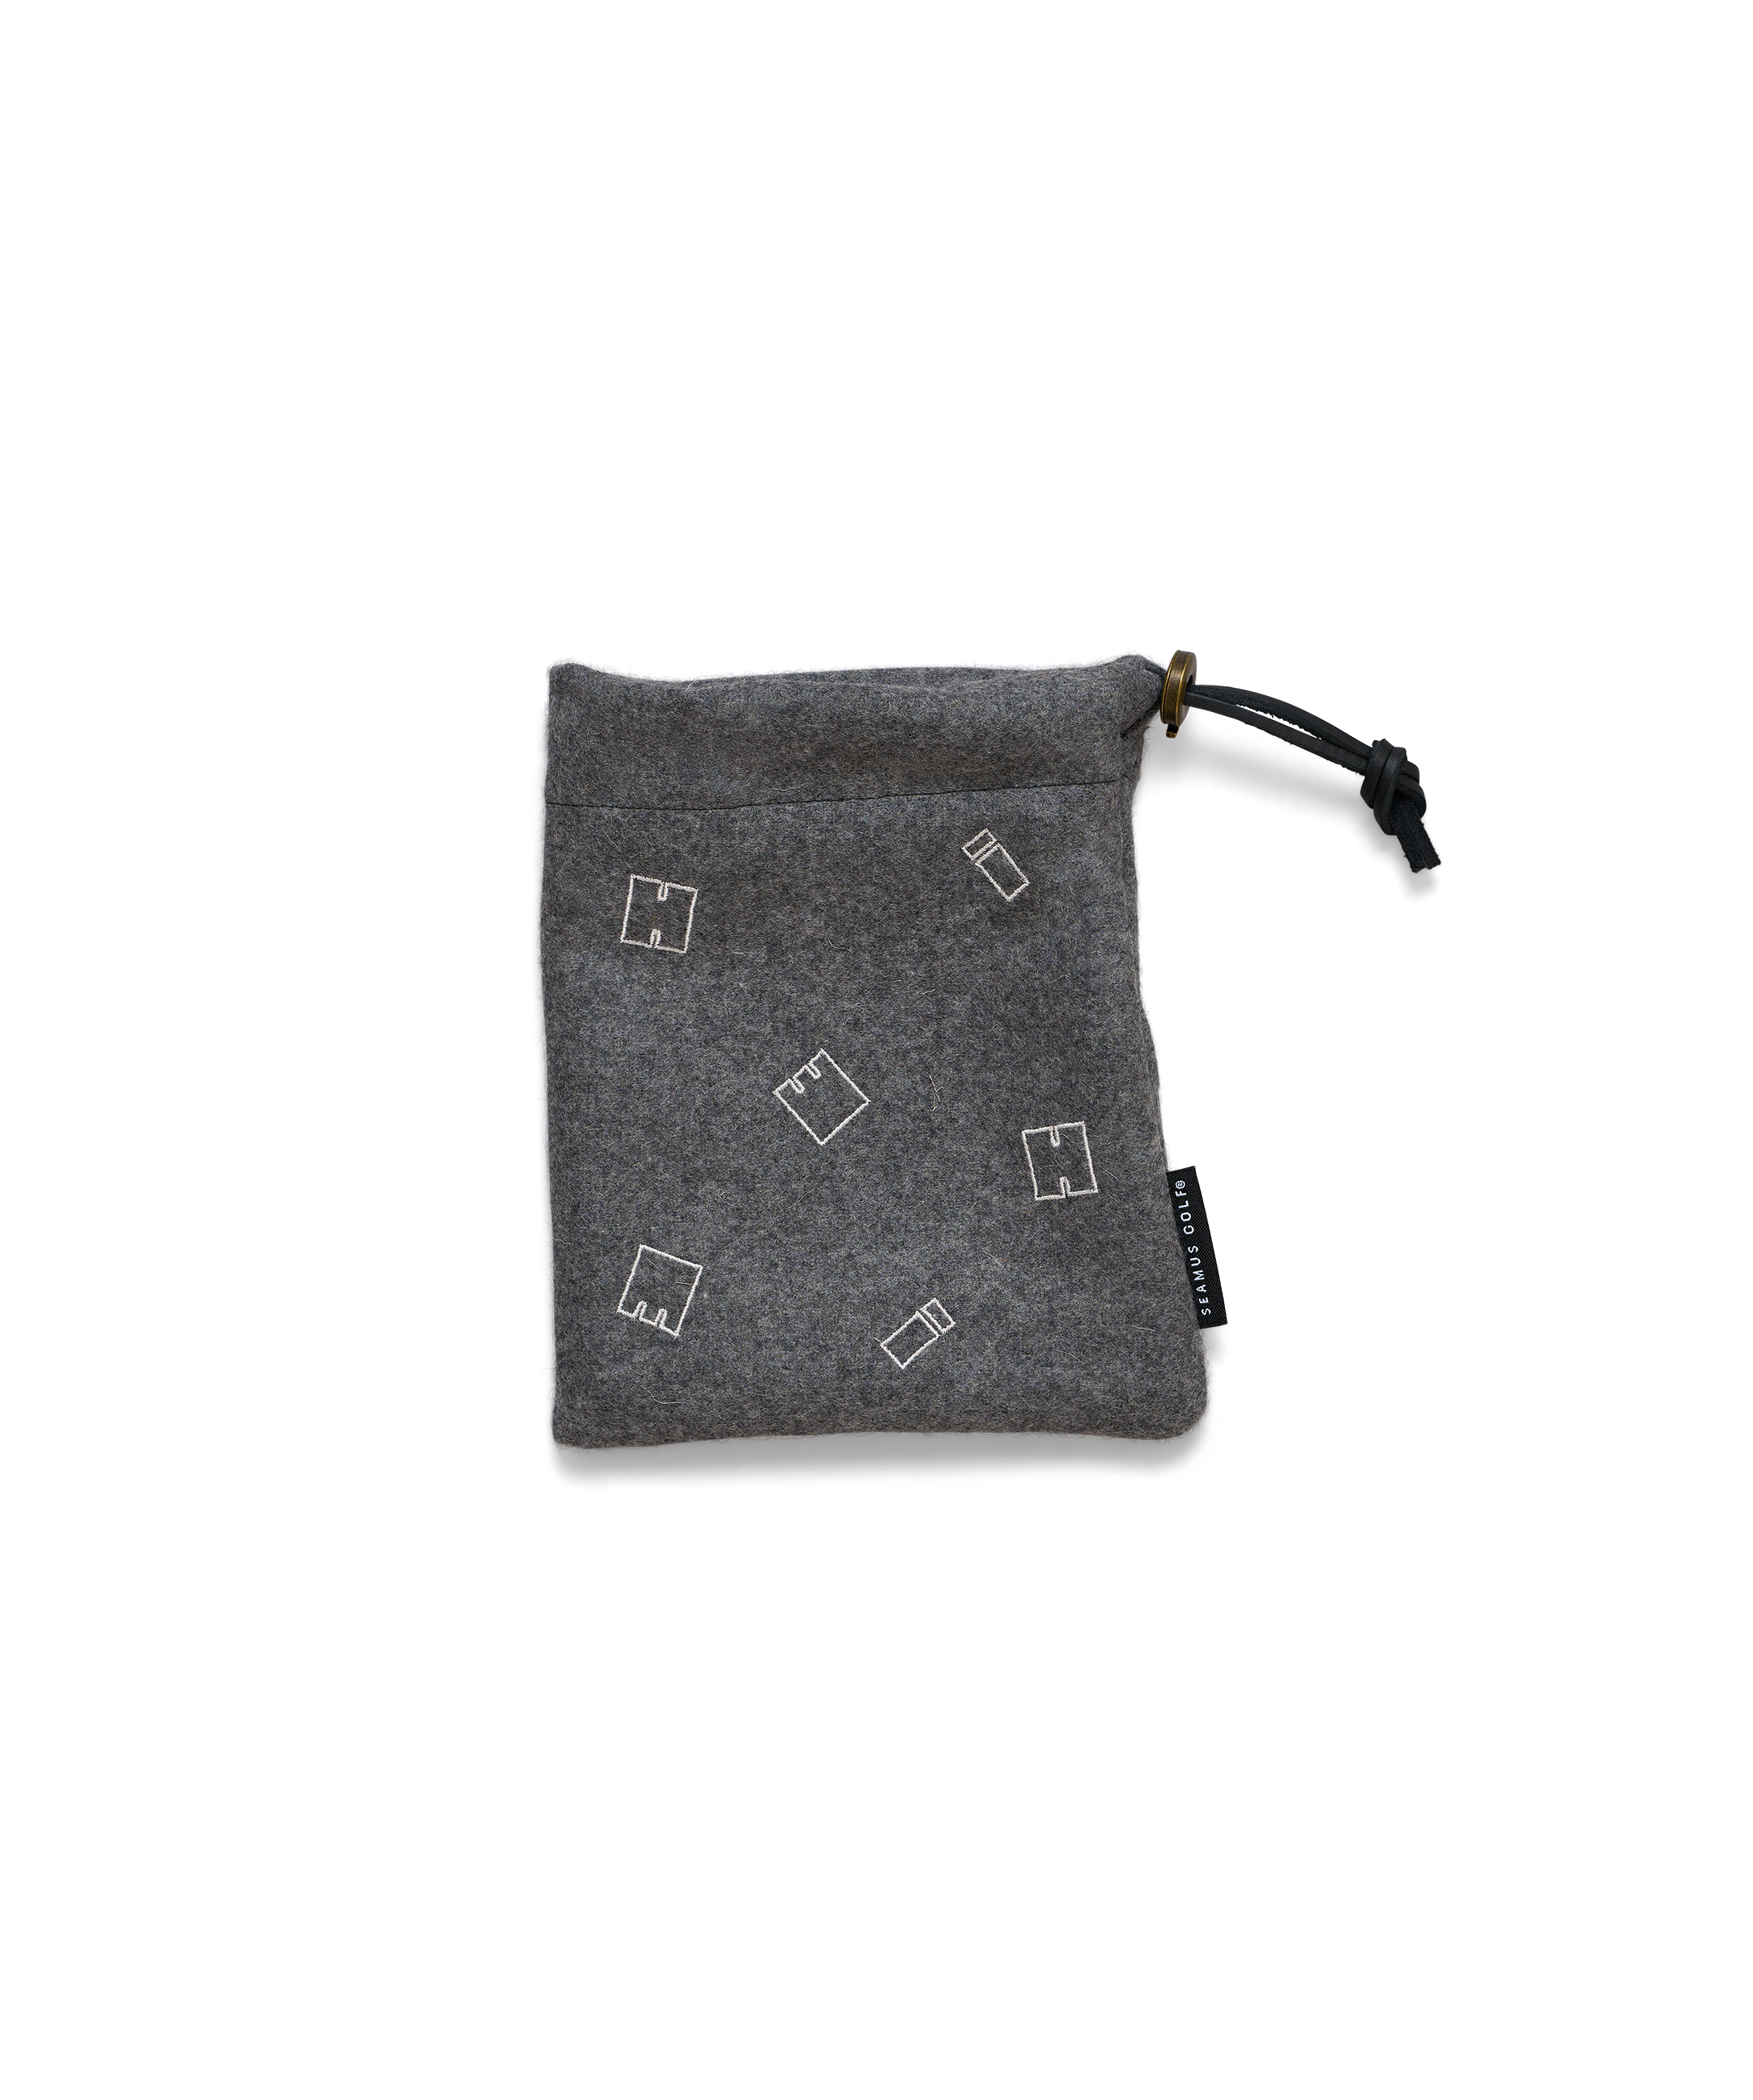 Grey Melton Wool Embroidered Limited Seamus Pouches